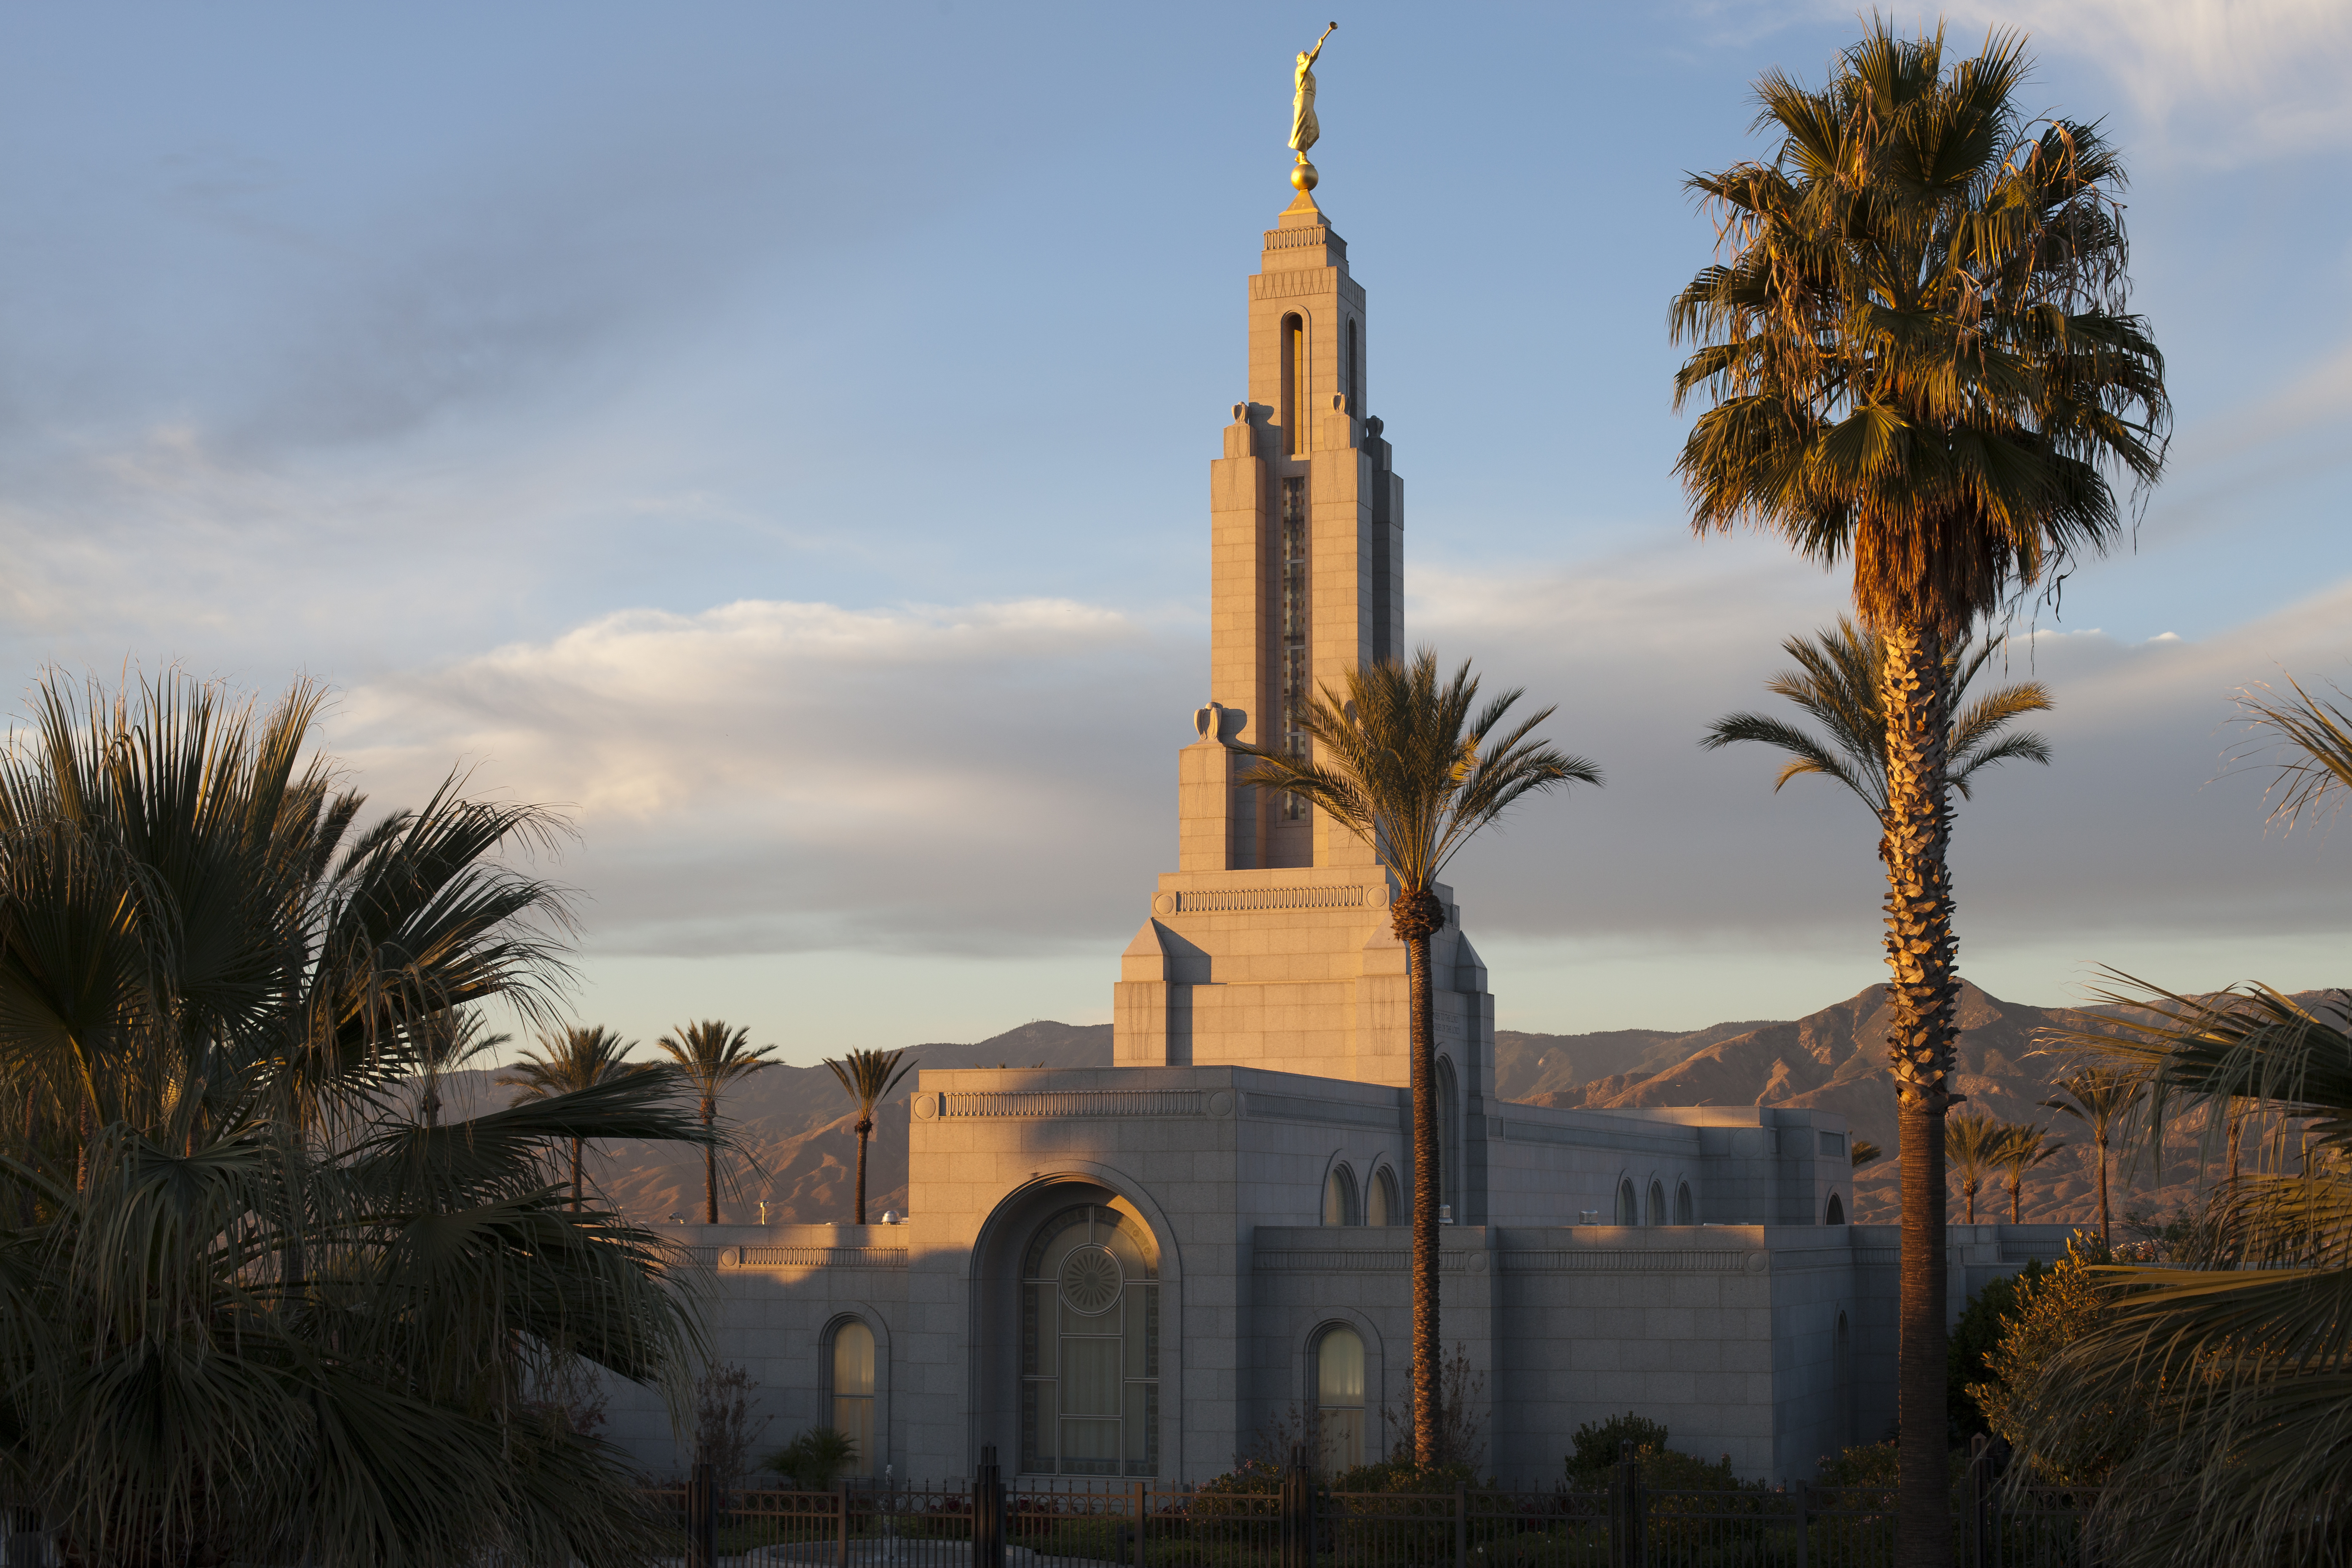 The top of the Redlands California Temple, including a view of some windows and the spire. Trees surround the temple at sunset.